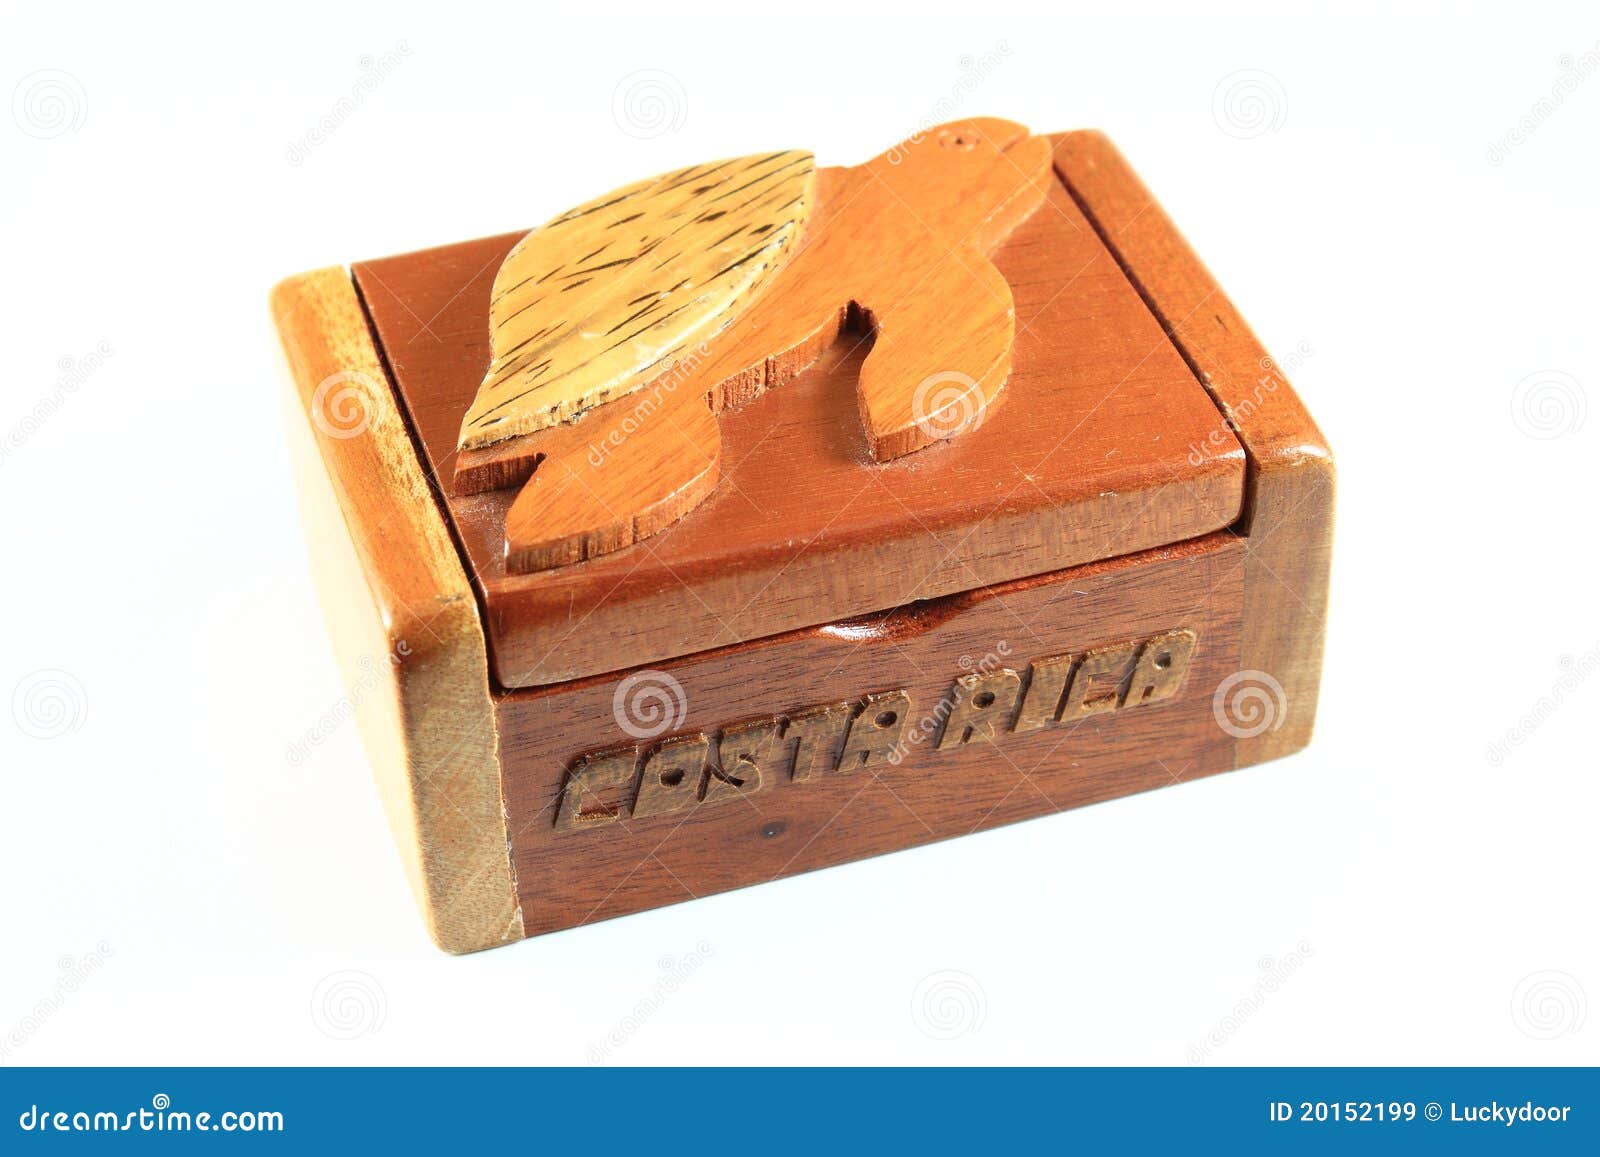 Jewelry Box Royalty Free Stock Images - Image: 20152199